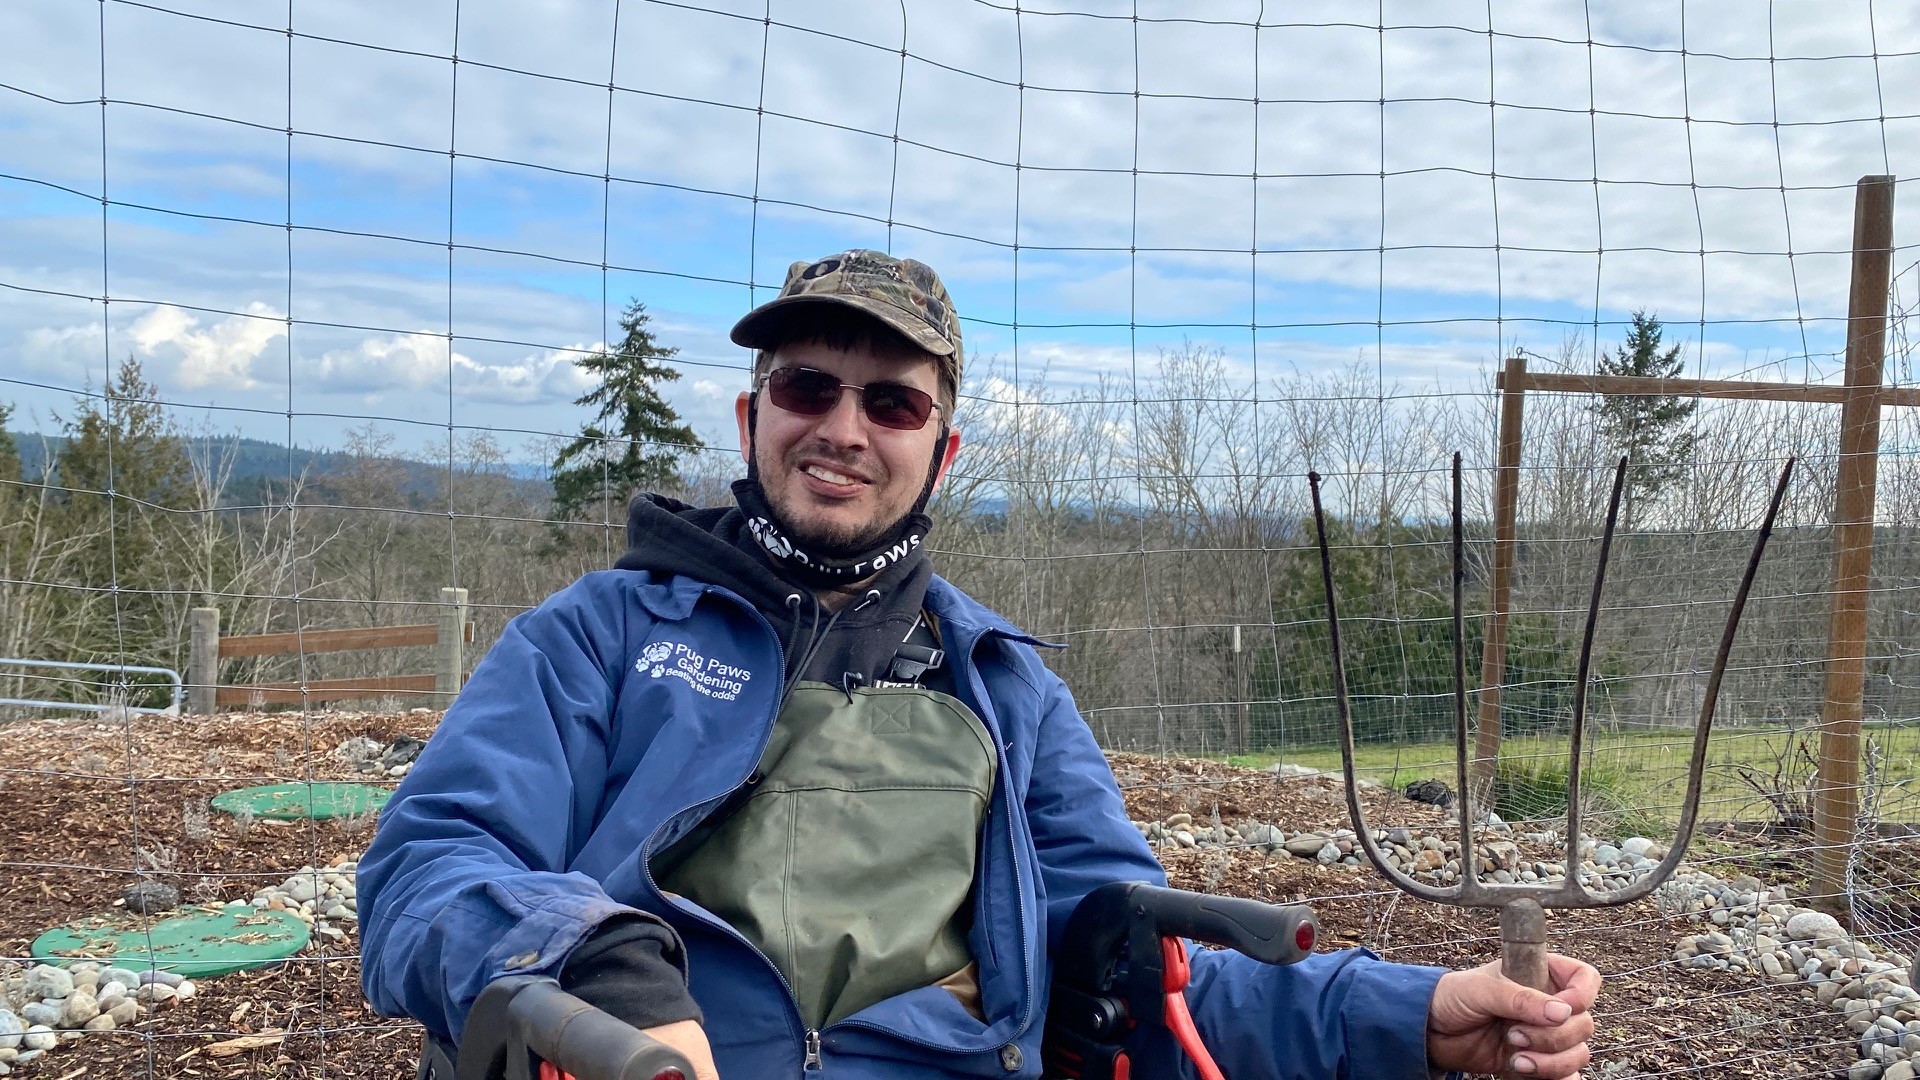 Terry ‘TJ’ Belgarde has cerebral palsy and a successful landscaping business that sees no limits